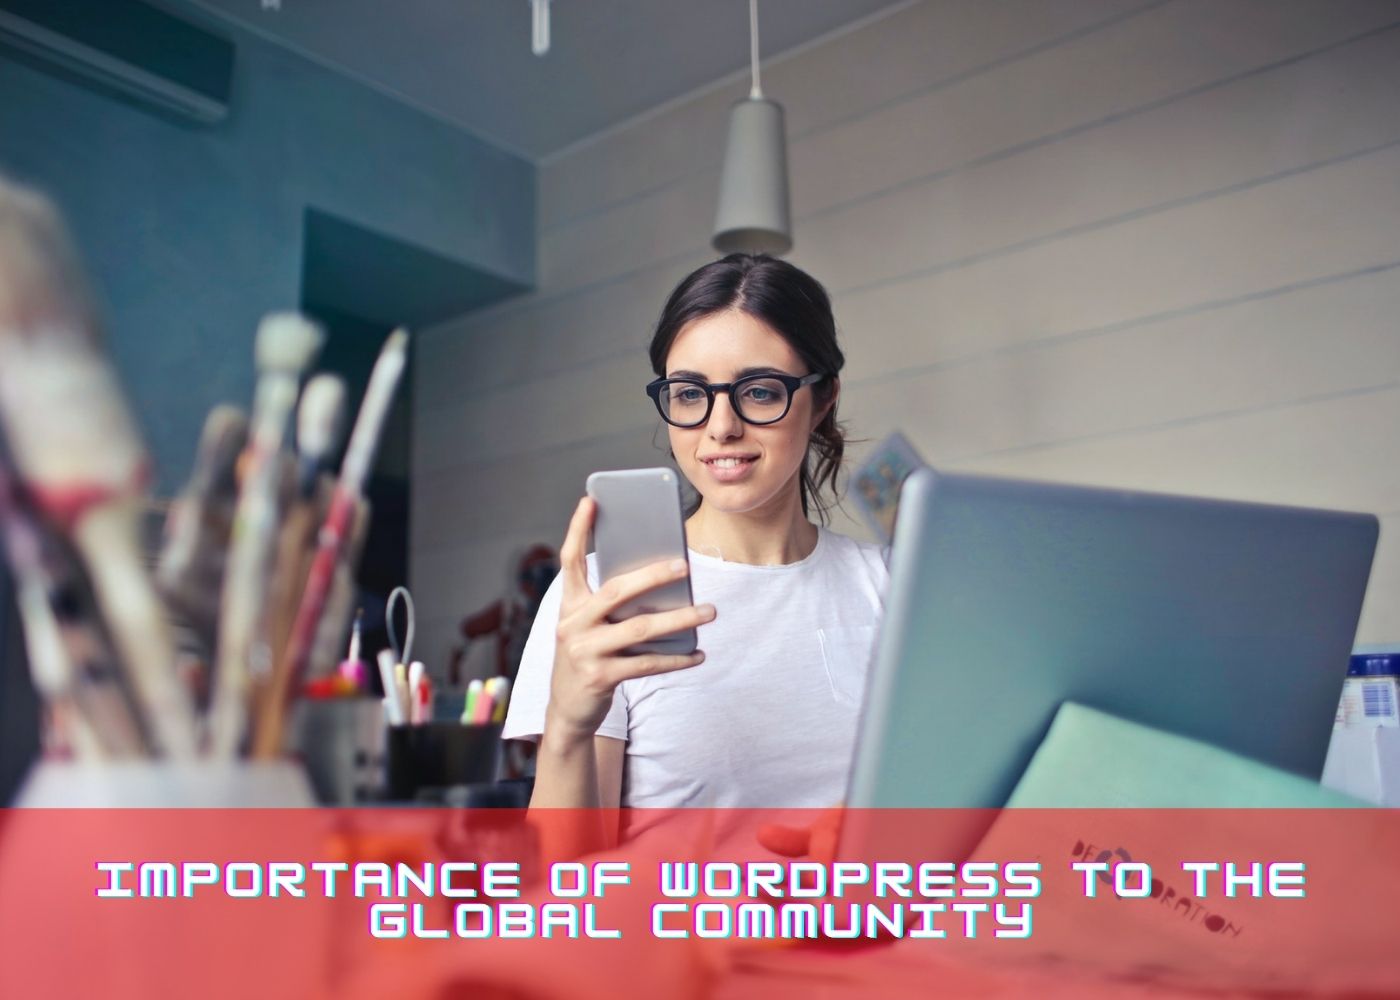 Importance of WordPress to the Global Community